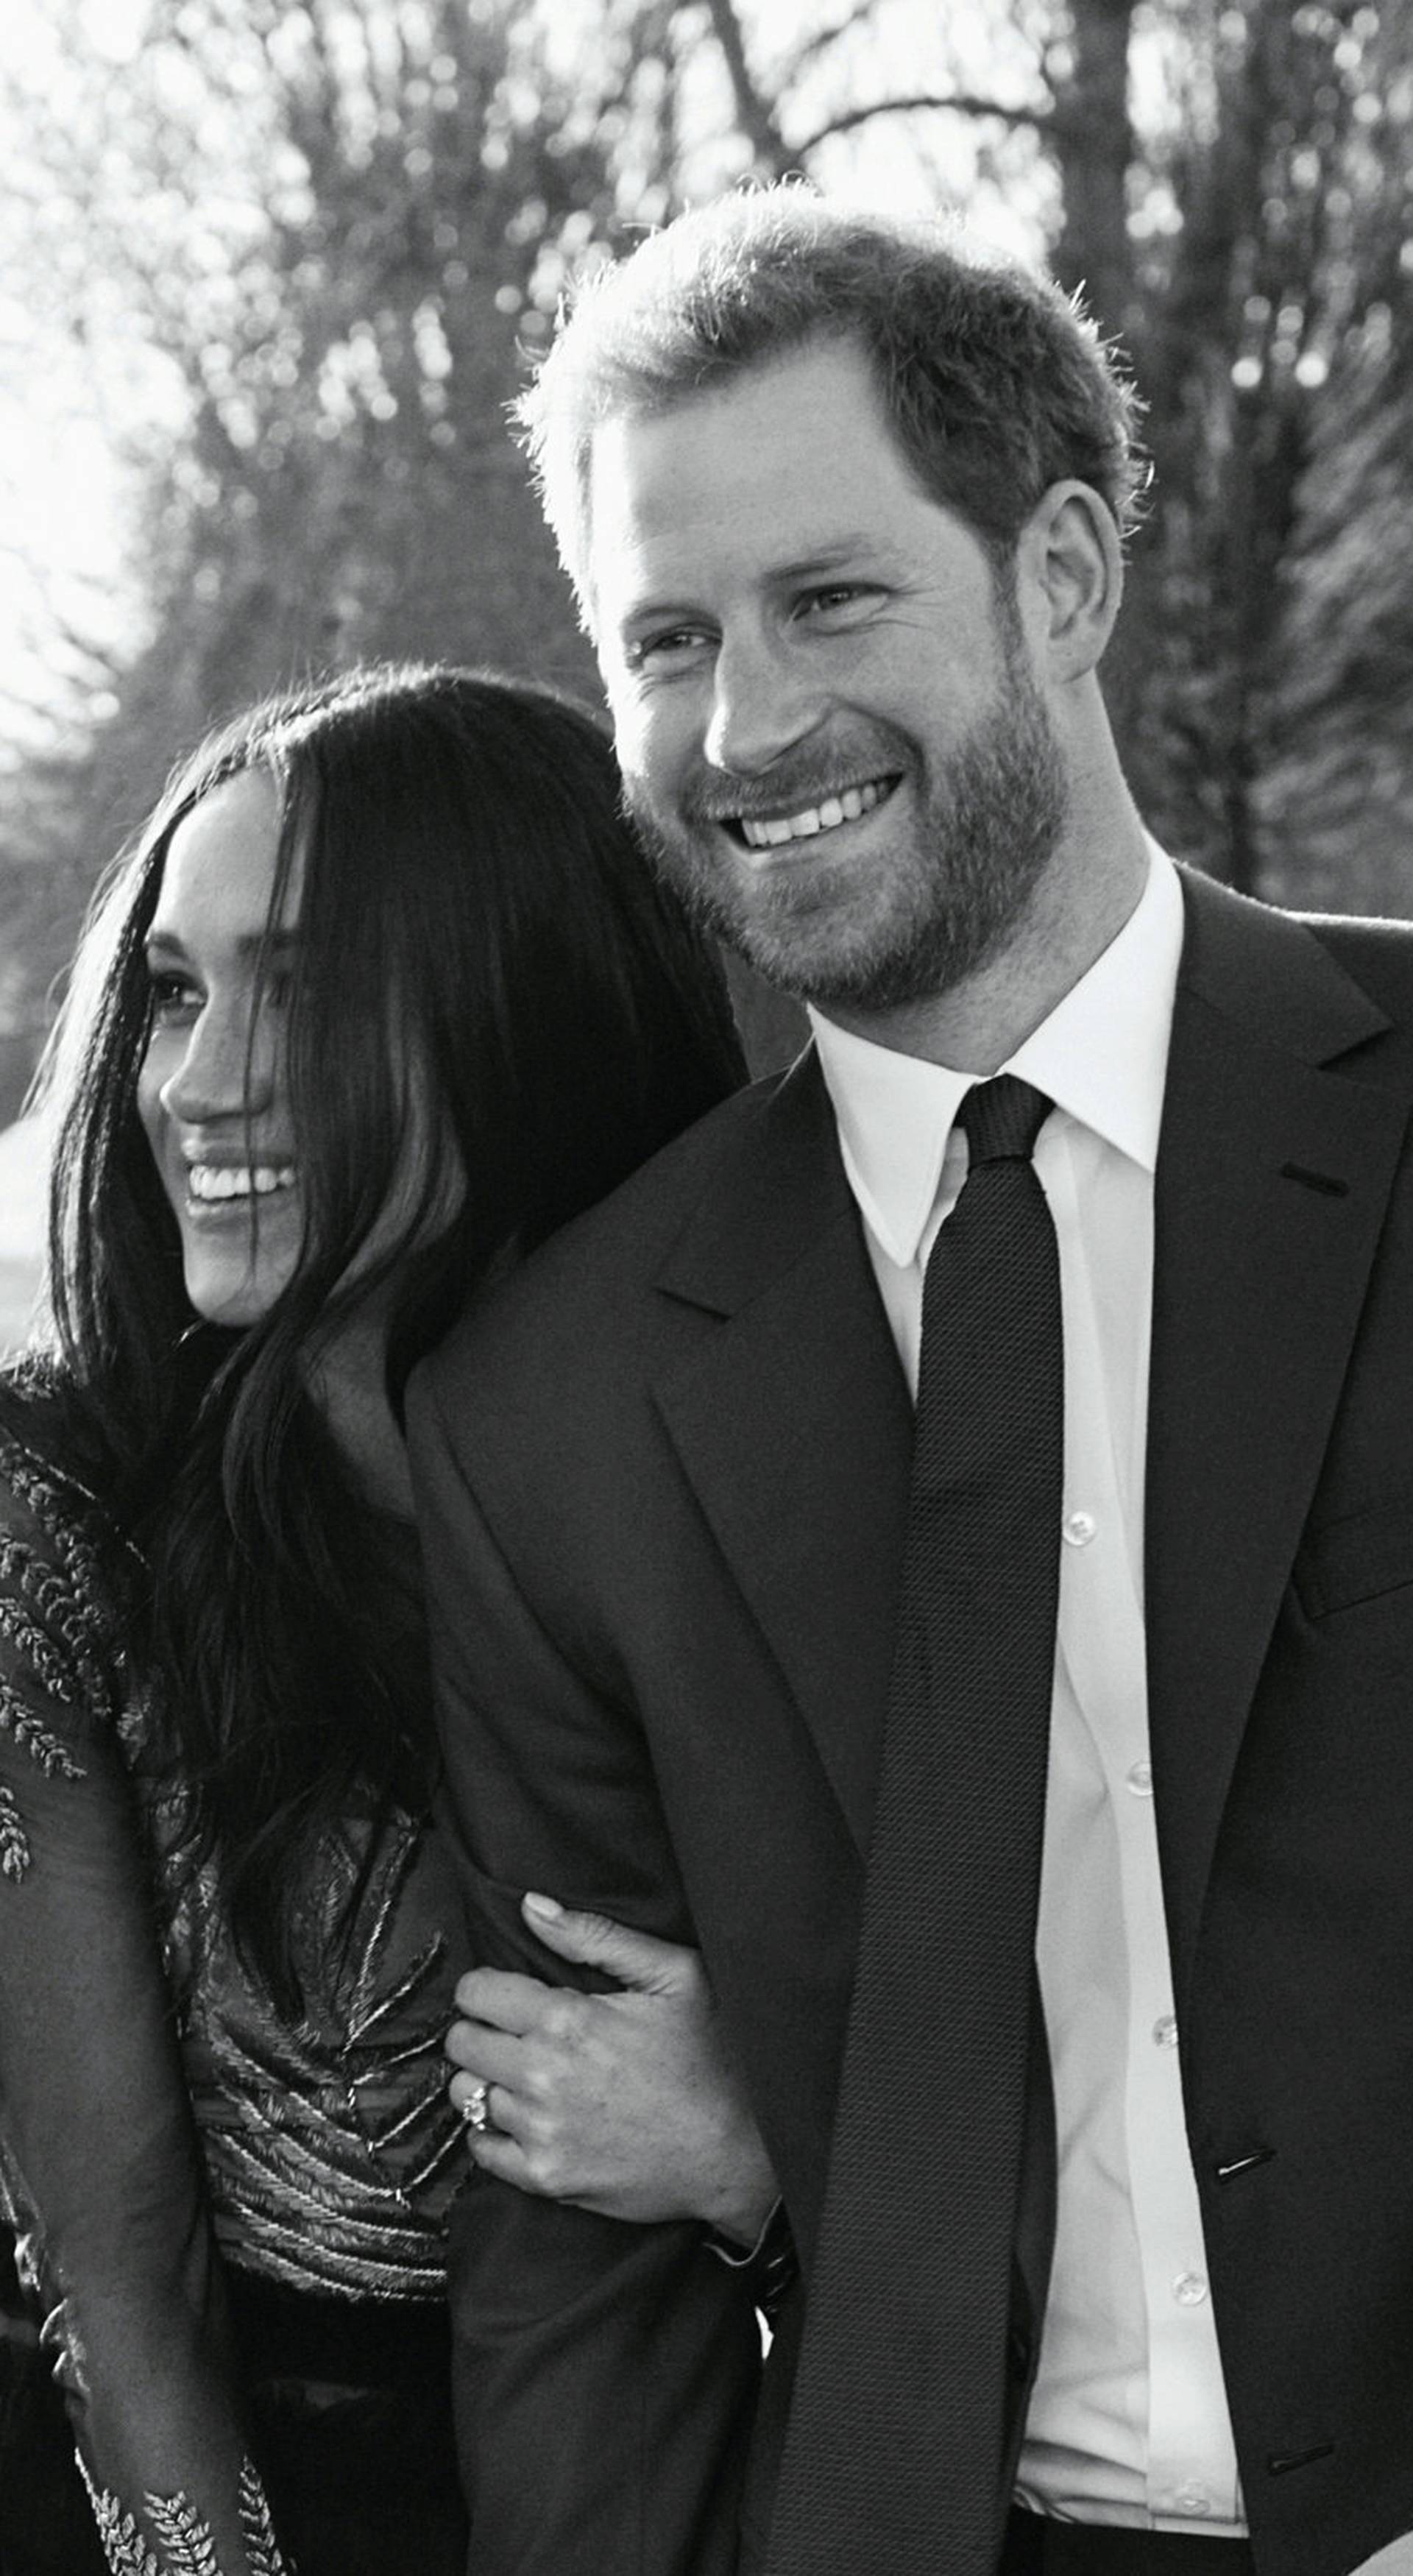 FILE PHOTO: An official engagement photo released by Kensington Palace of Prince Harry and Meghan Markle taken by photographer Alexi Lubomirski, at Frogmore House in Windsor